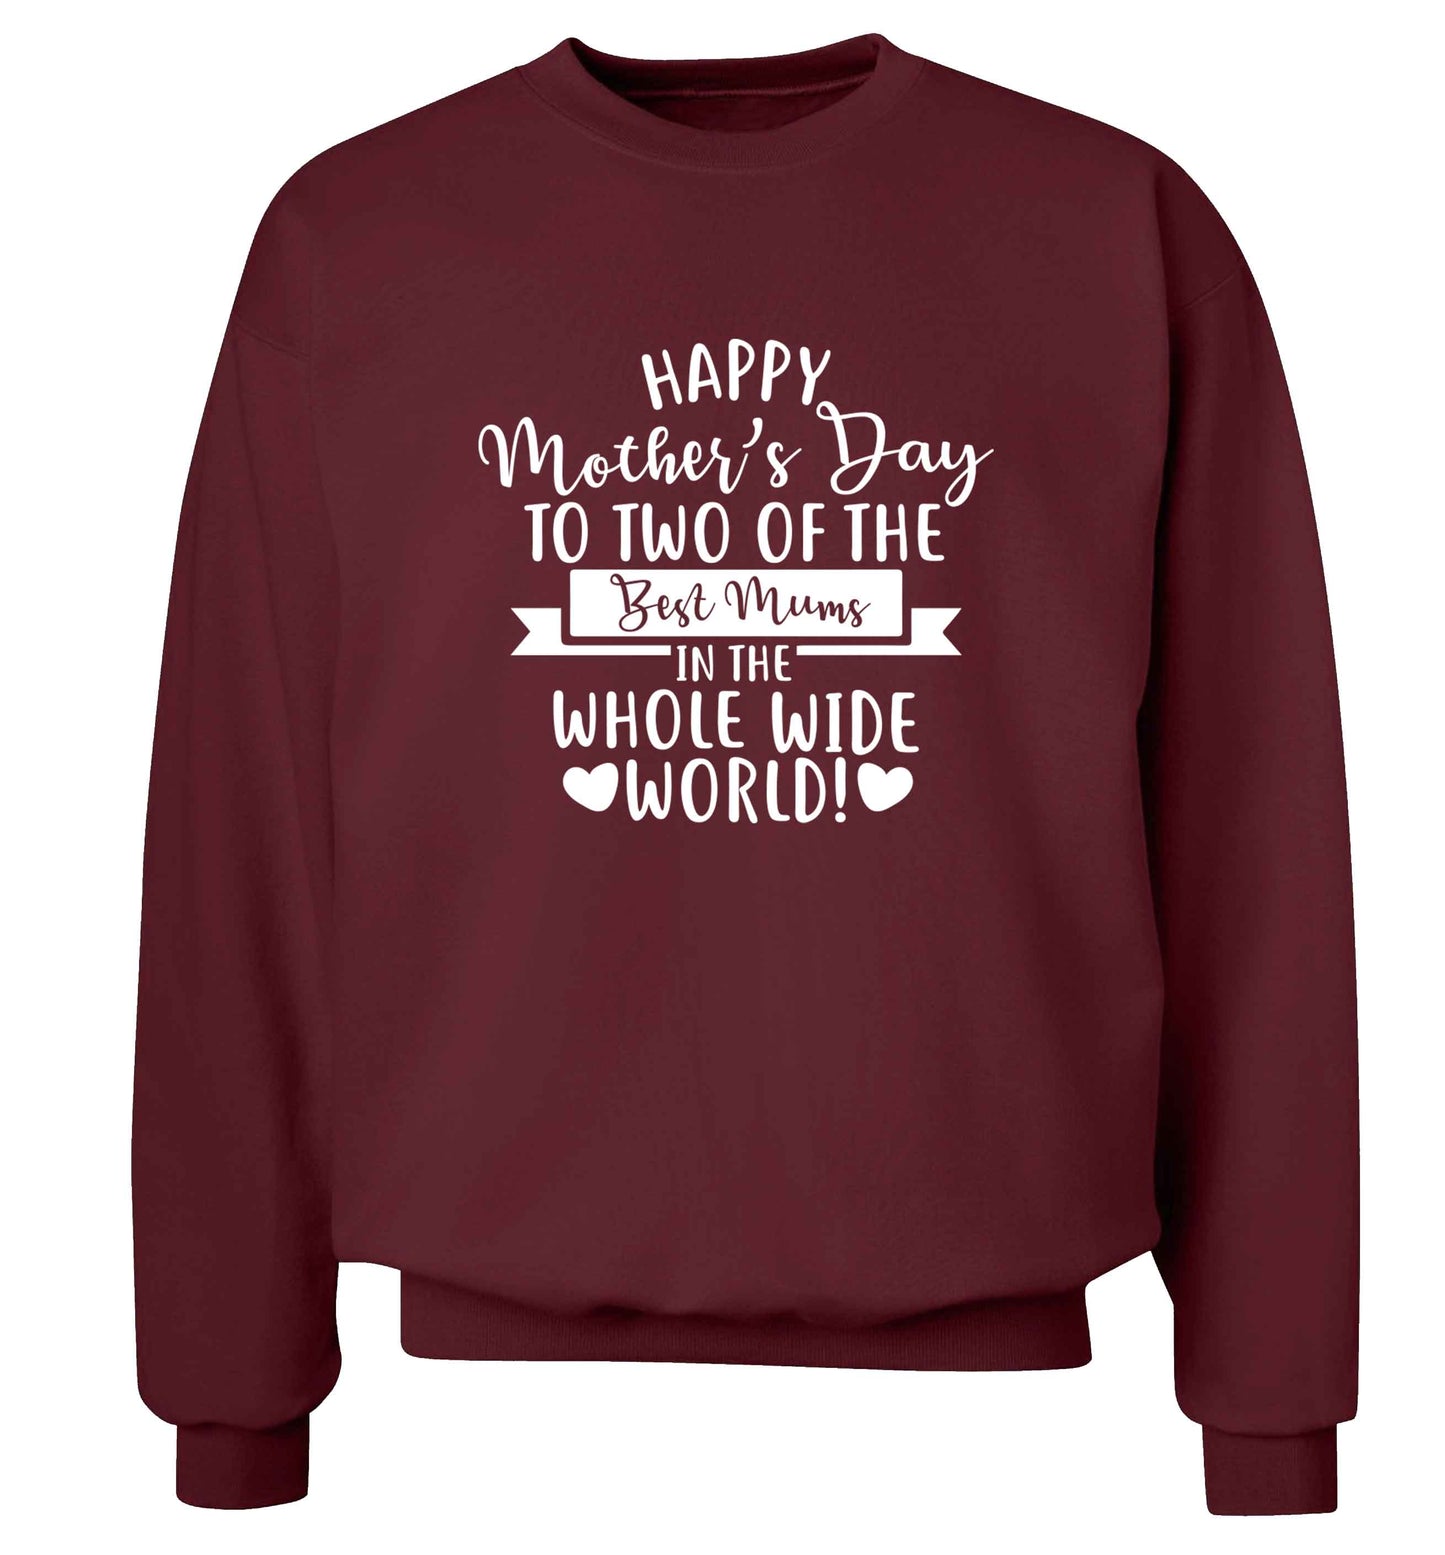 Happy mother's day to two of the best mums in the whole wide world adult's unisex maroon sweater 2XL